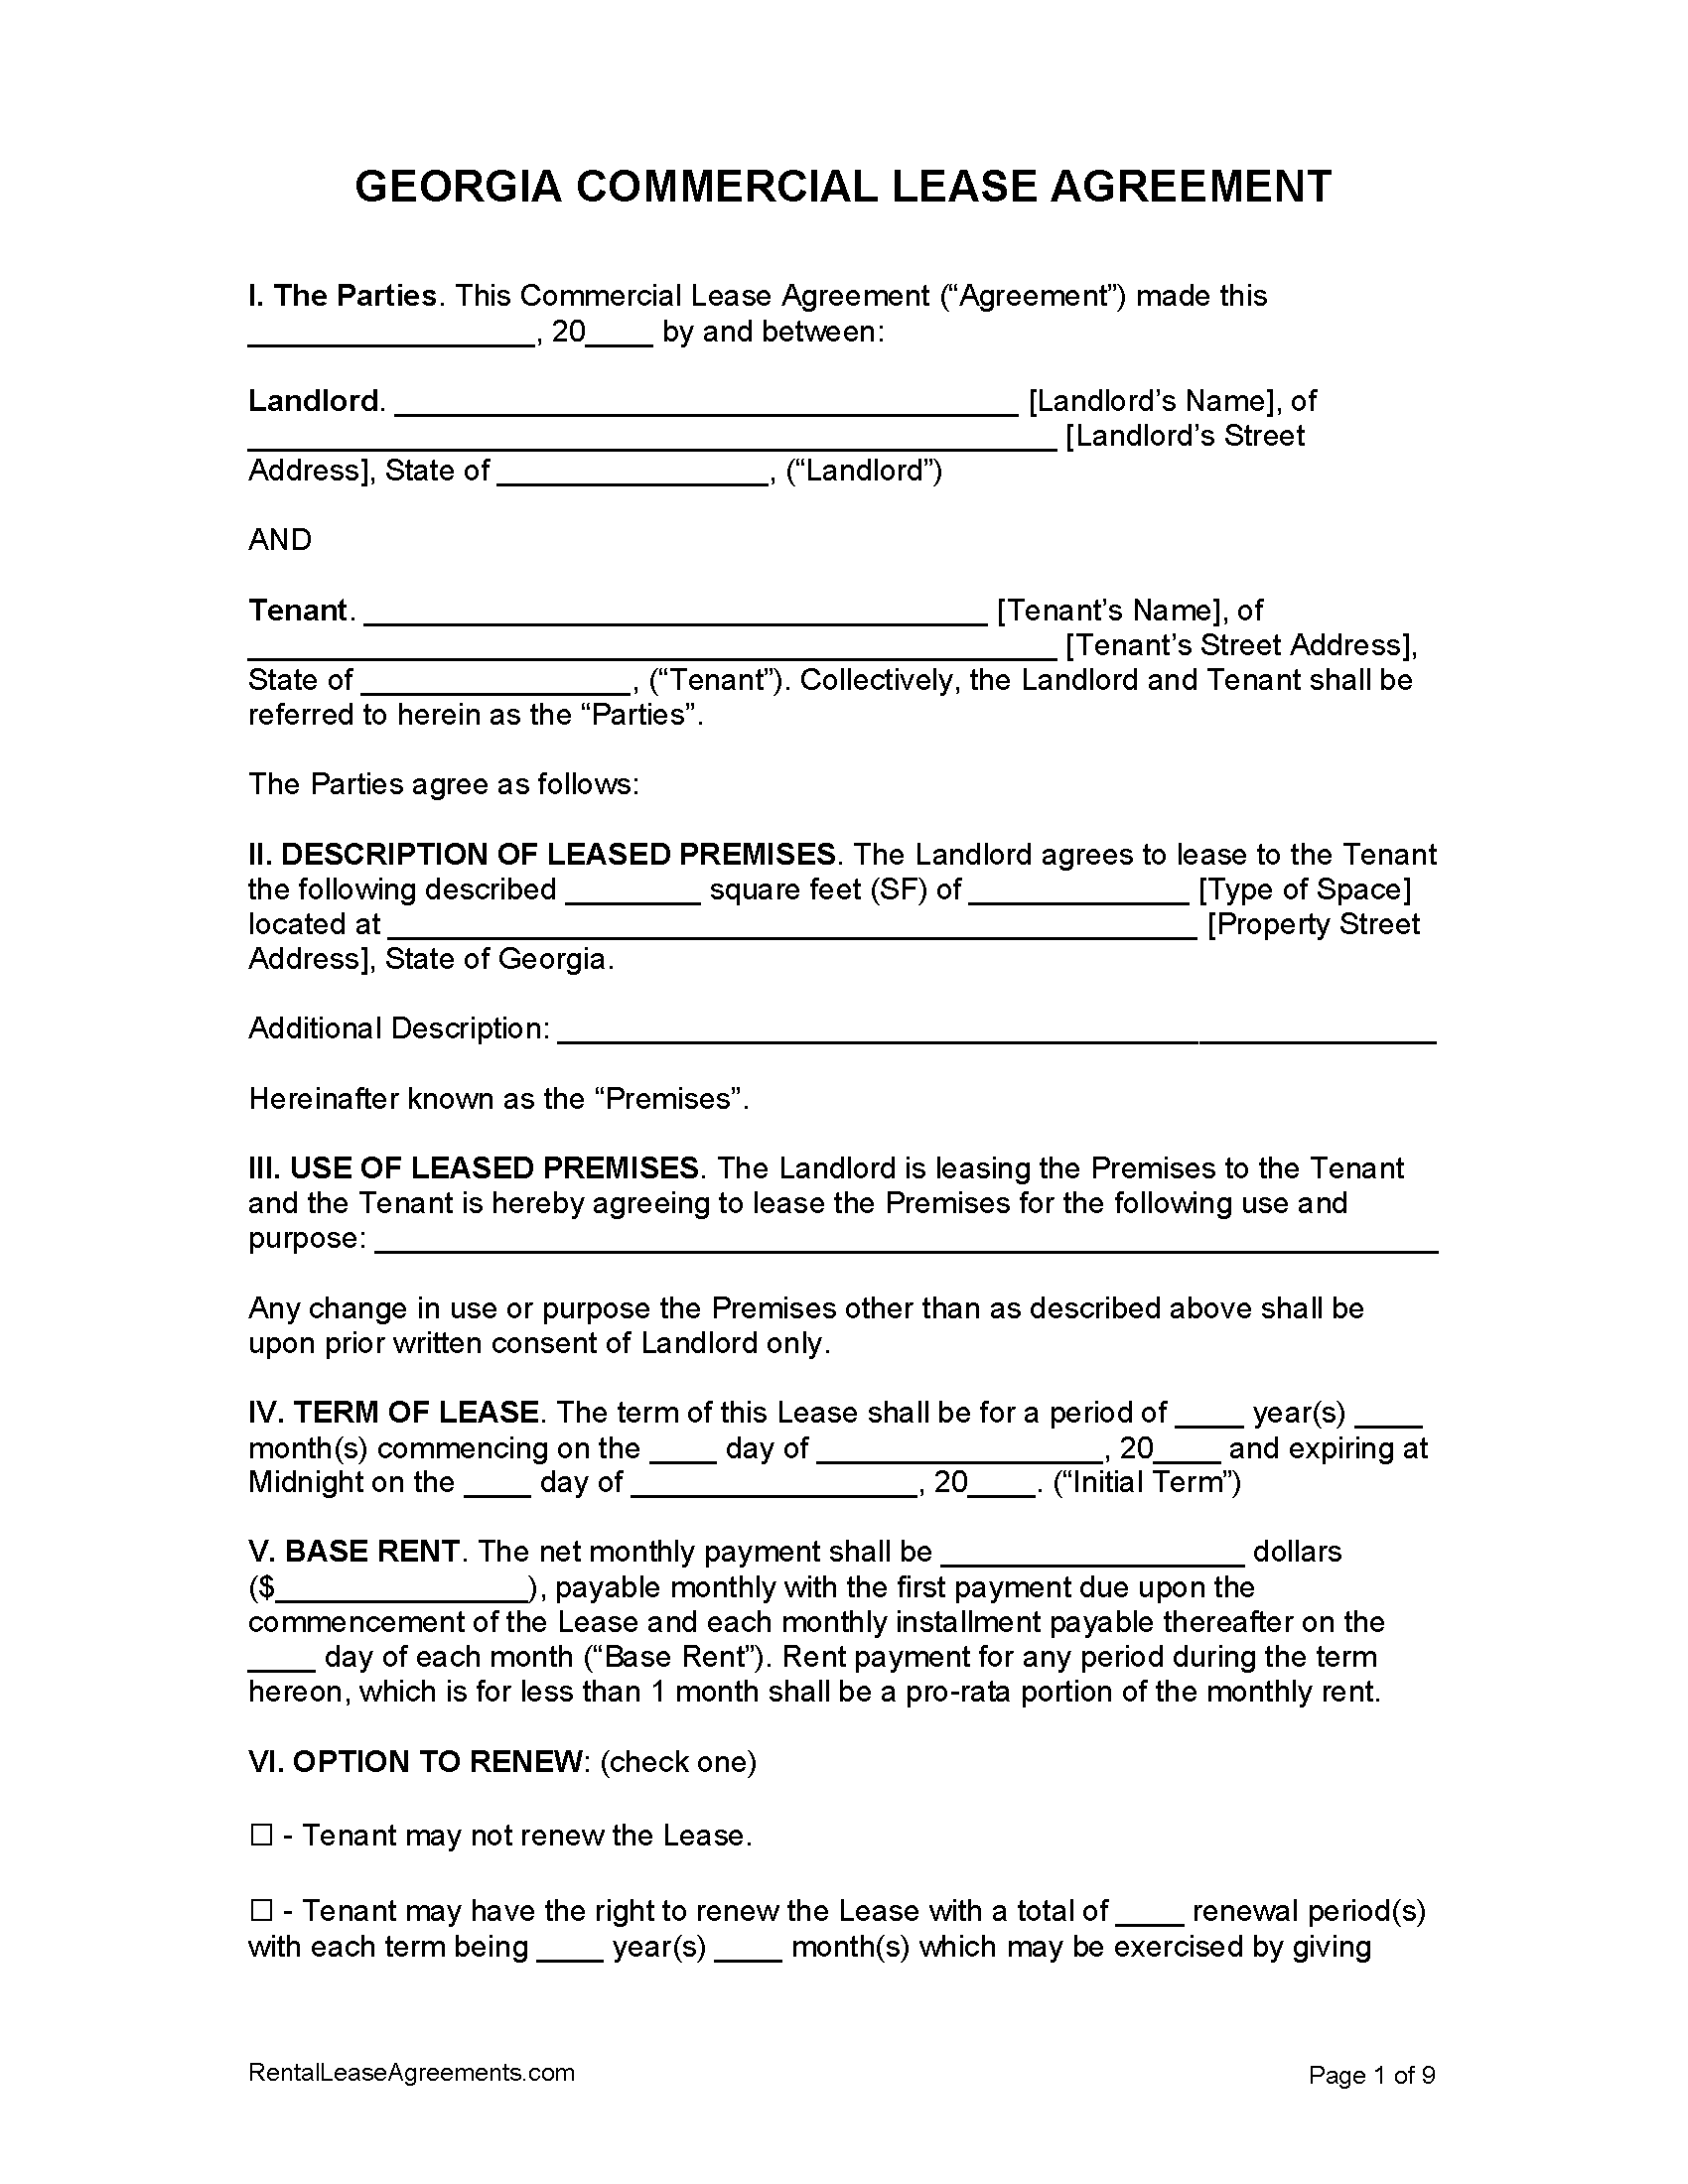 free-georgia-commercial-lease-agreement-pdf-ms-word